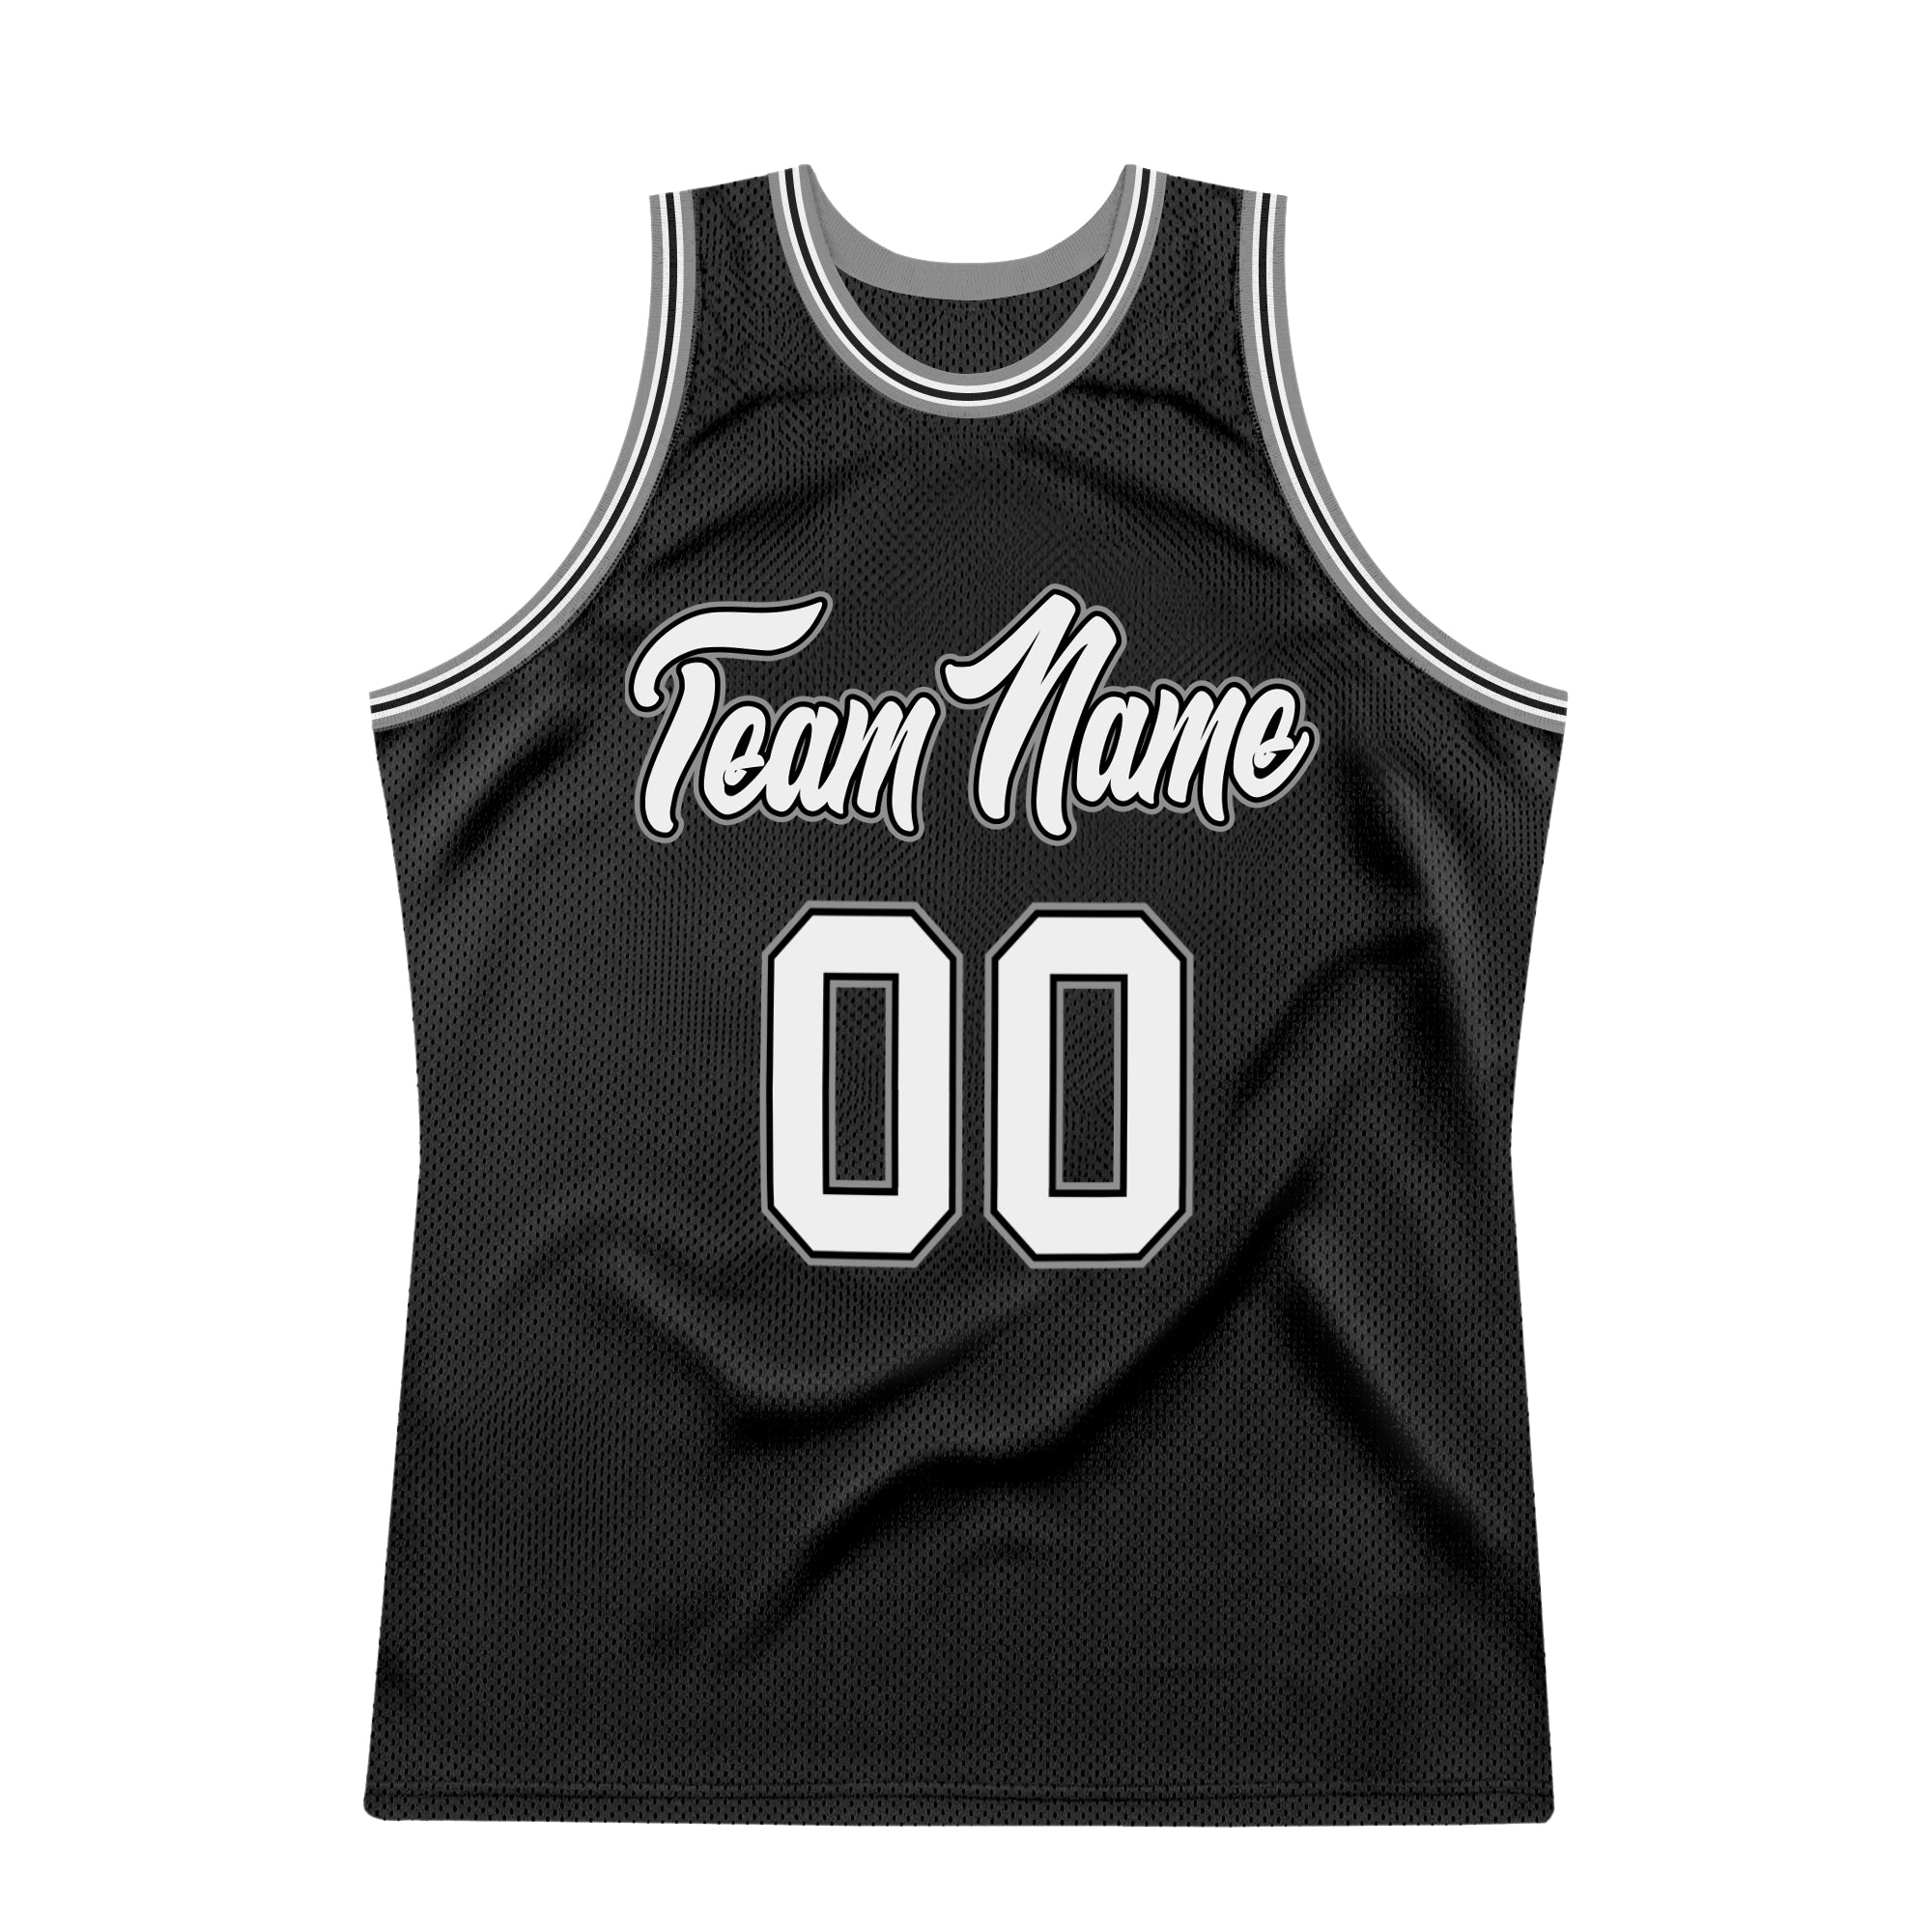 authentic throwback nba jerseys